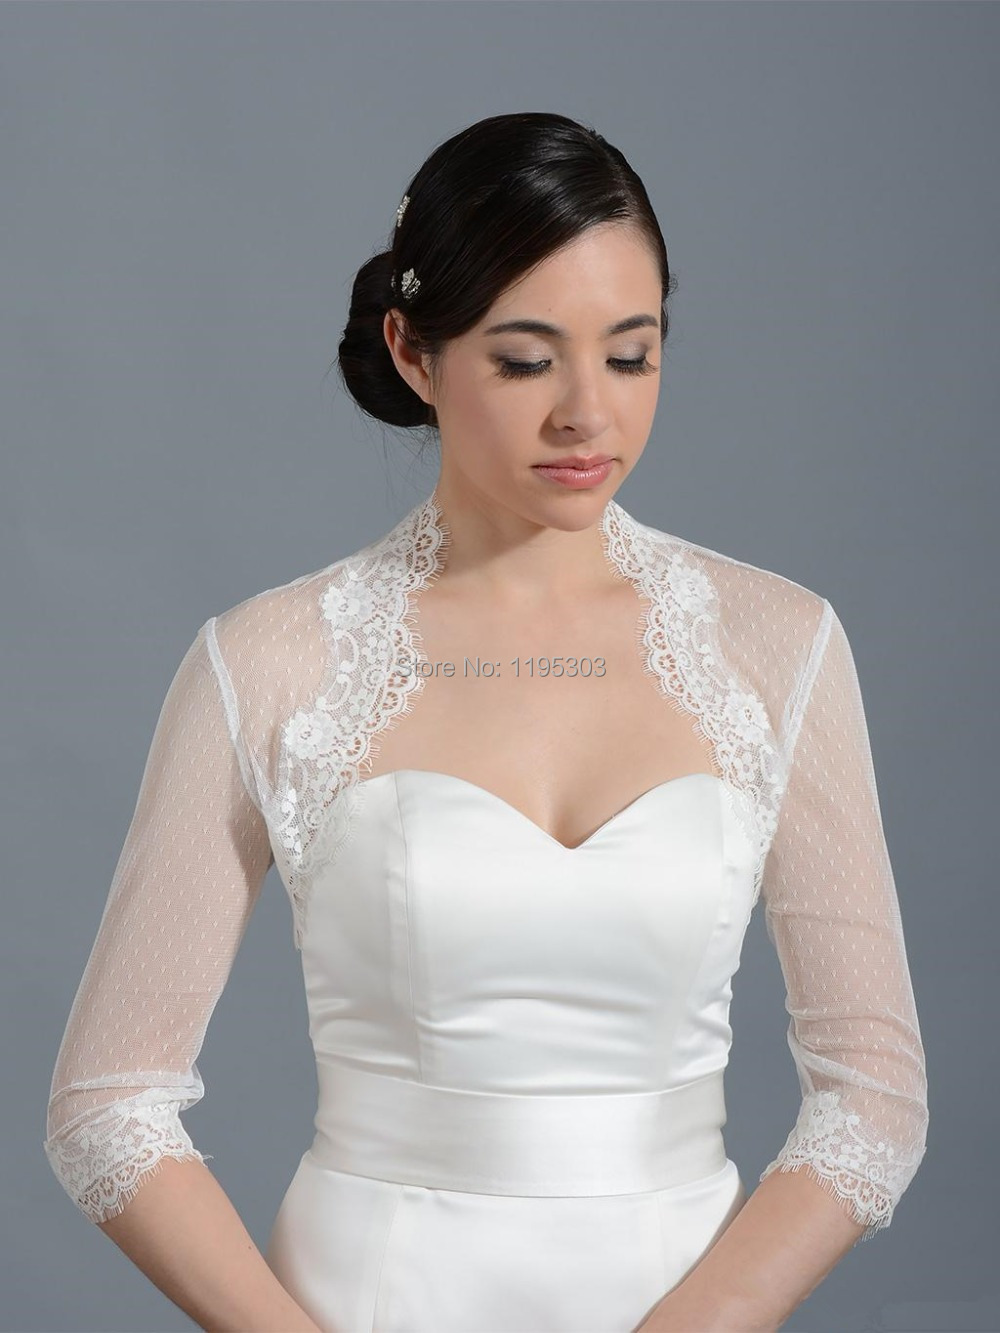 Compare Prices on Wrap Wedding Dresses- Online Shopping/Buy Low ...